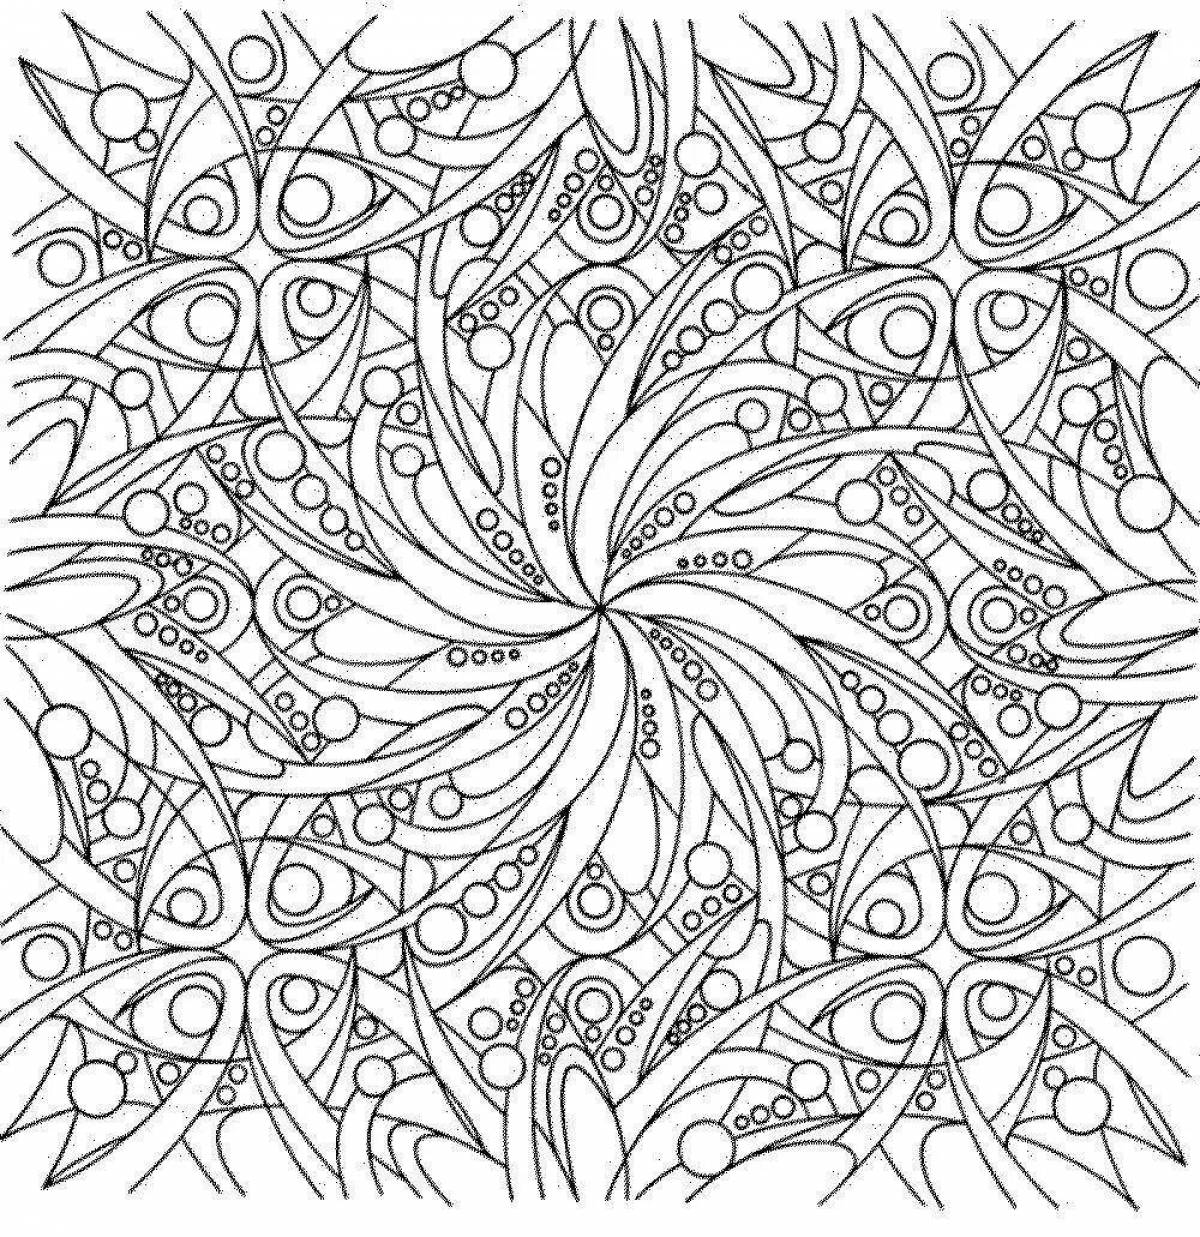 Thorny printable coloring book